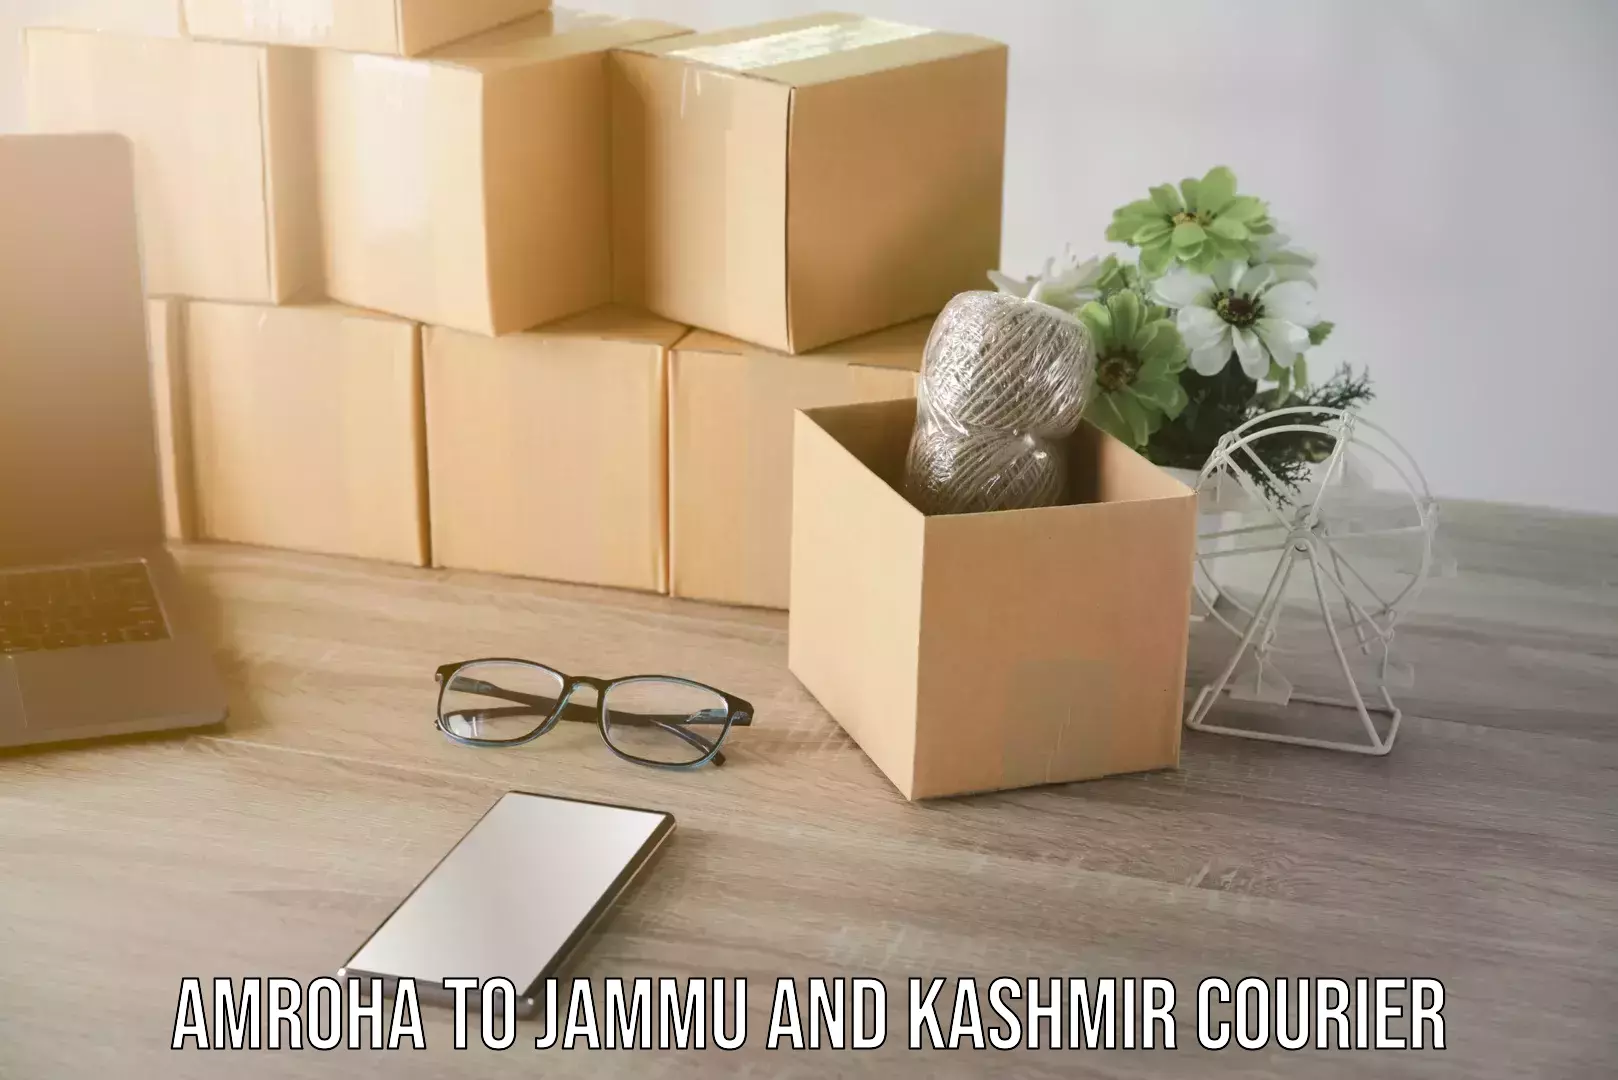 Nationwide delivery network Amroha to Jammu and Kashmir